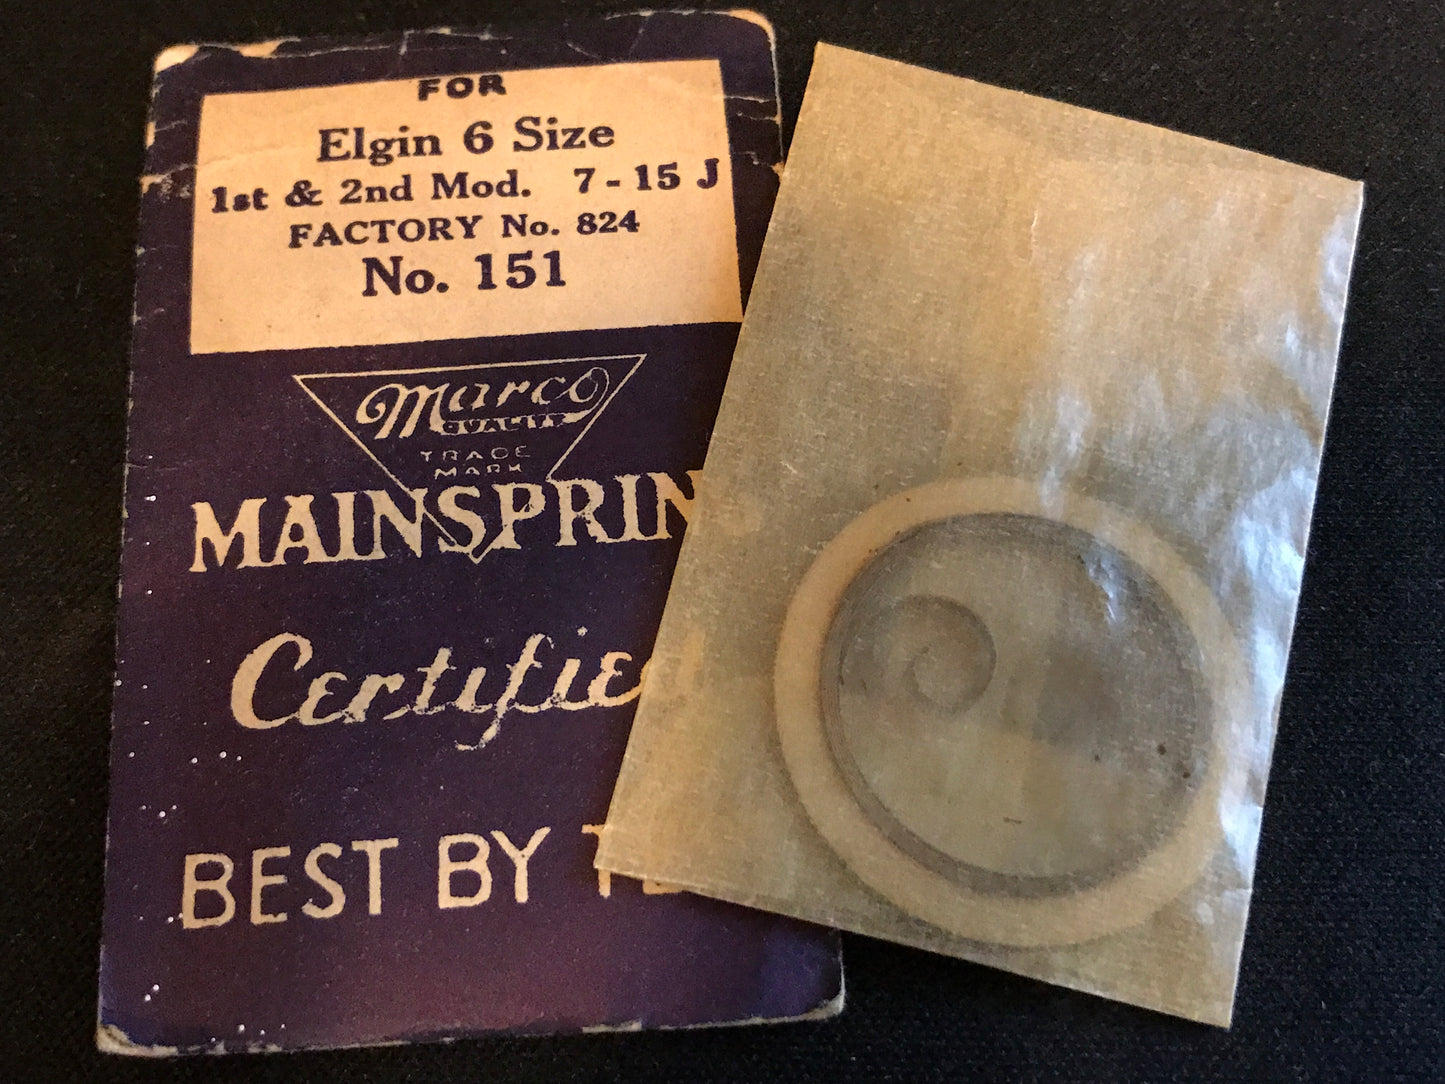 Marco Mainspring #151 for 6s Elgin movements Factory No. 824 - Steel